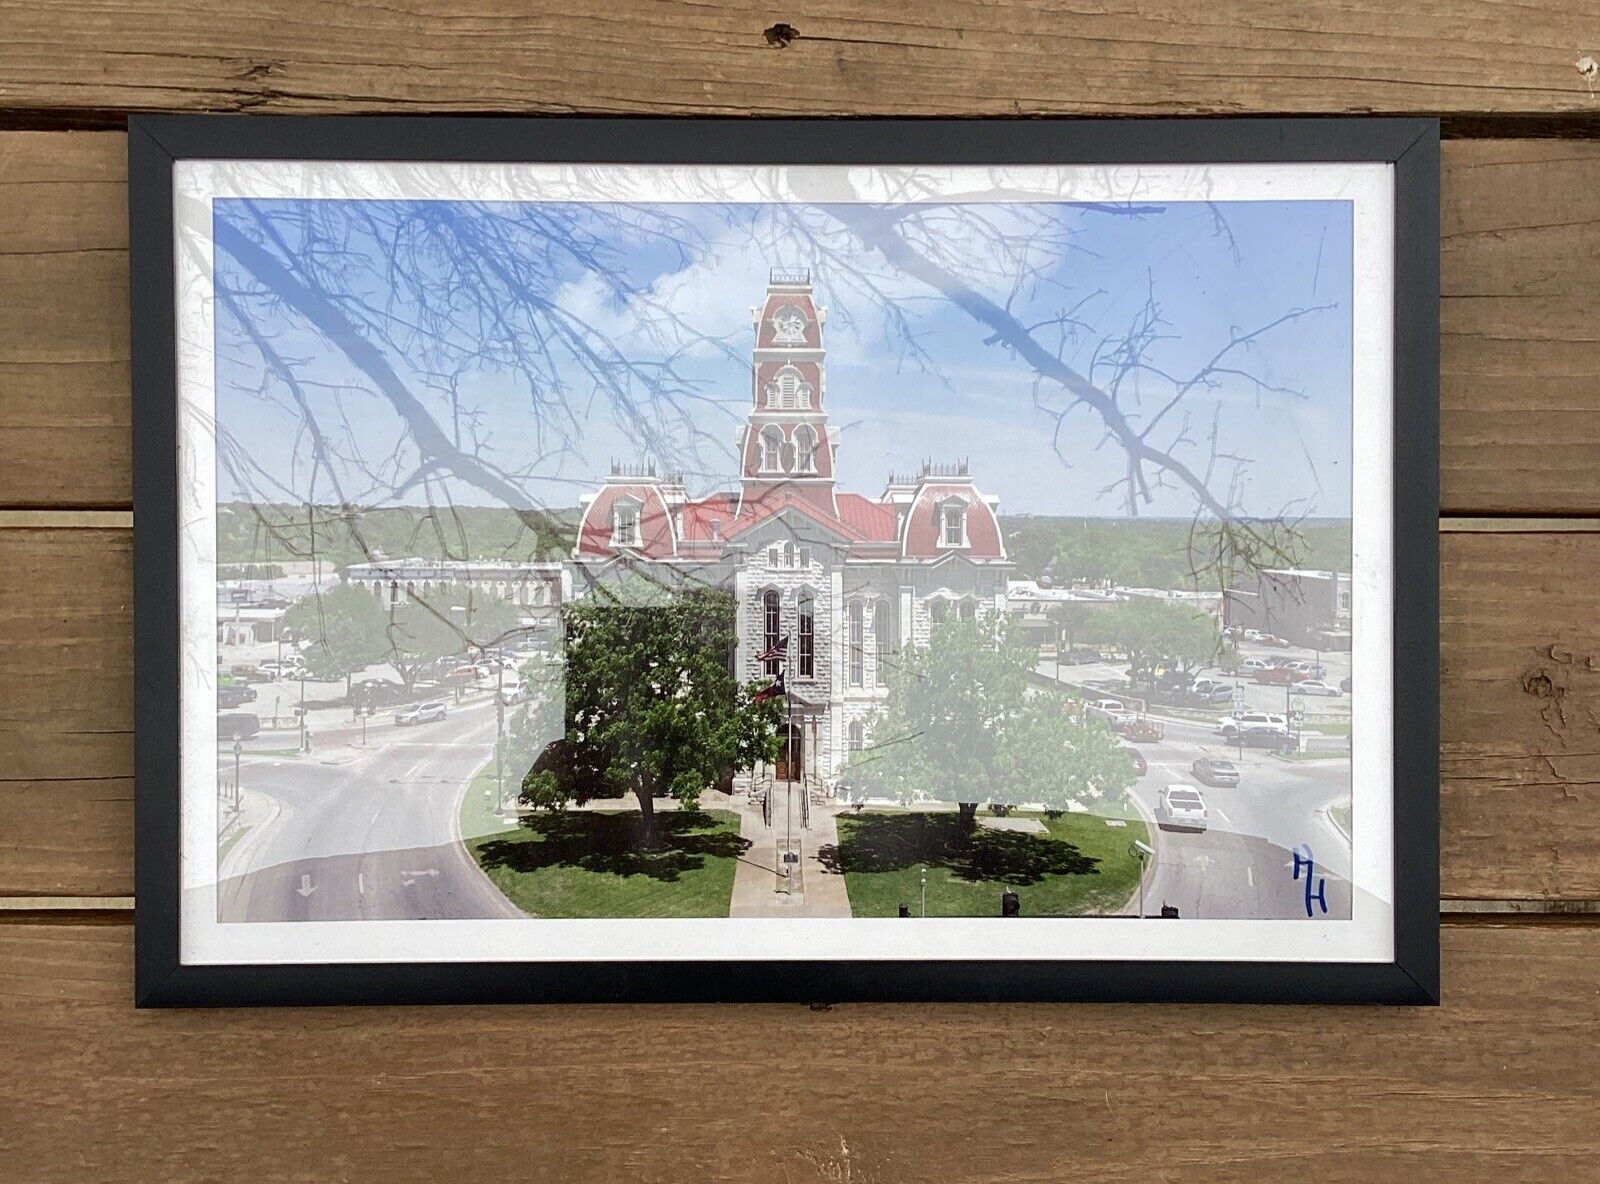 Weatherford TX Texas Courthouse Photo Framed 